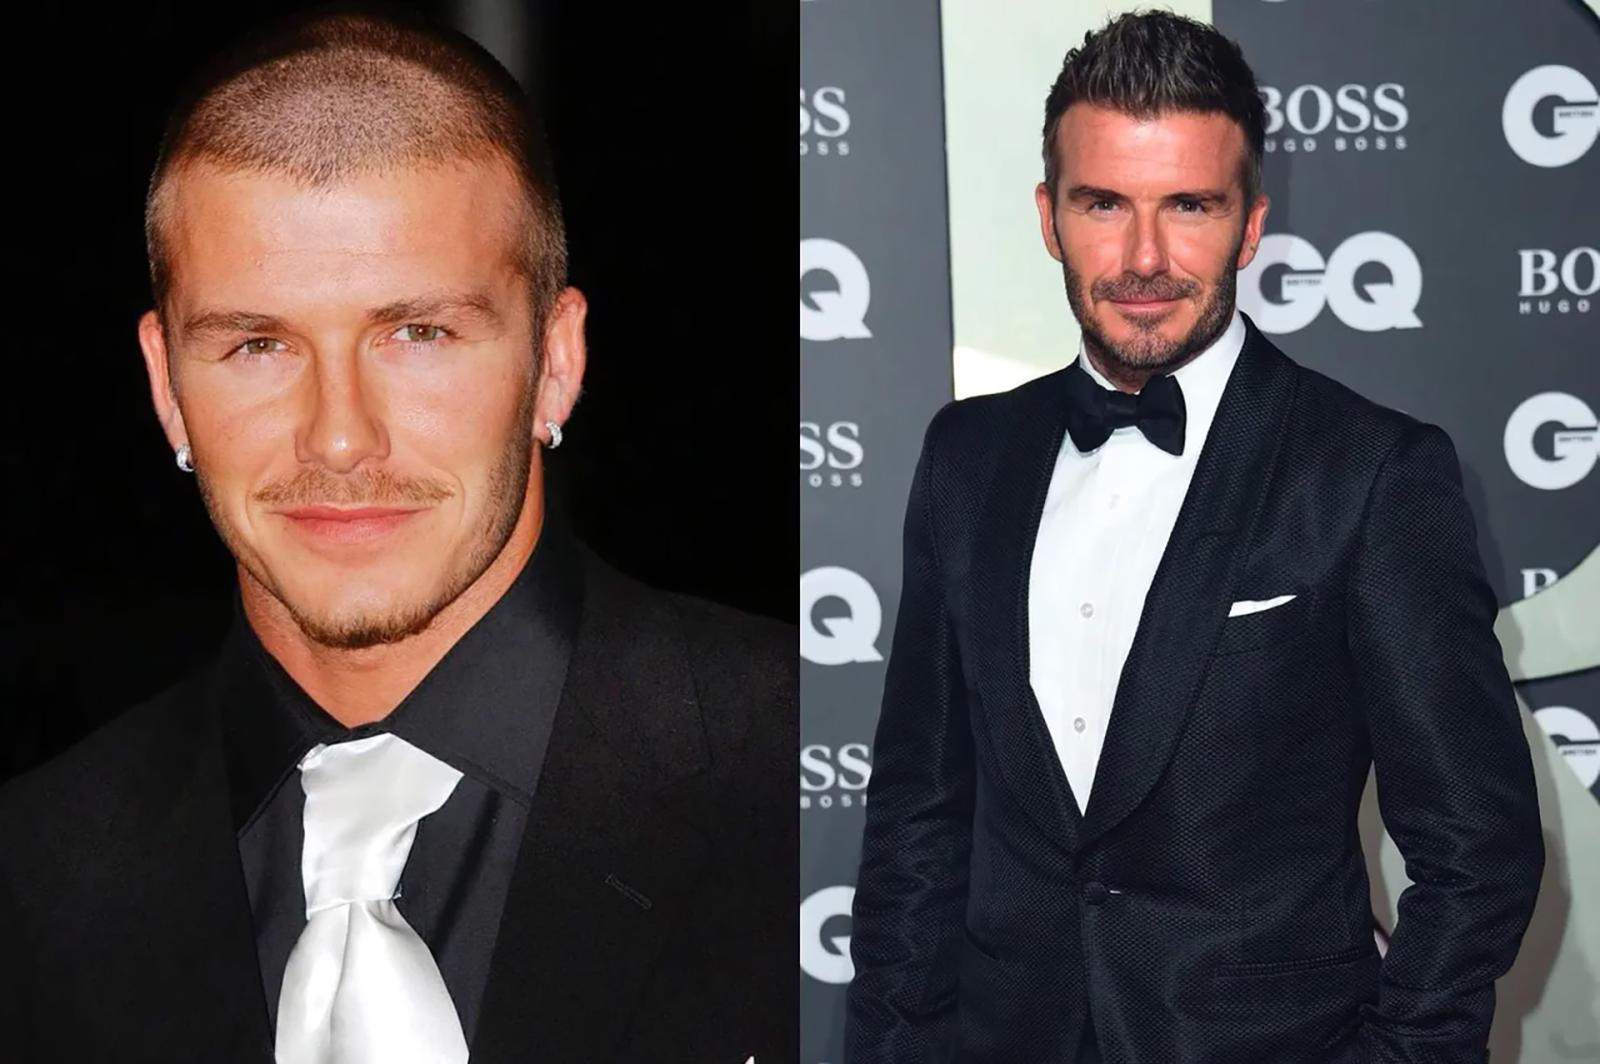 Where Are They Now? The Evolution of the Sexiest Men of the 2000s - image 4